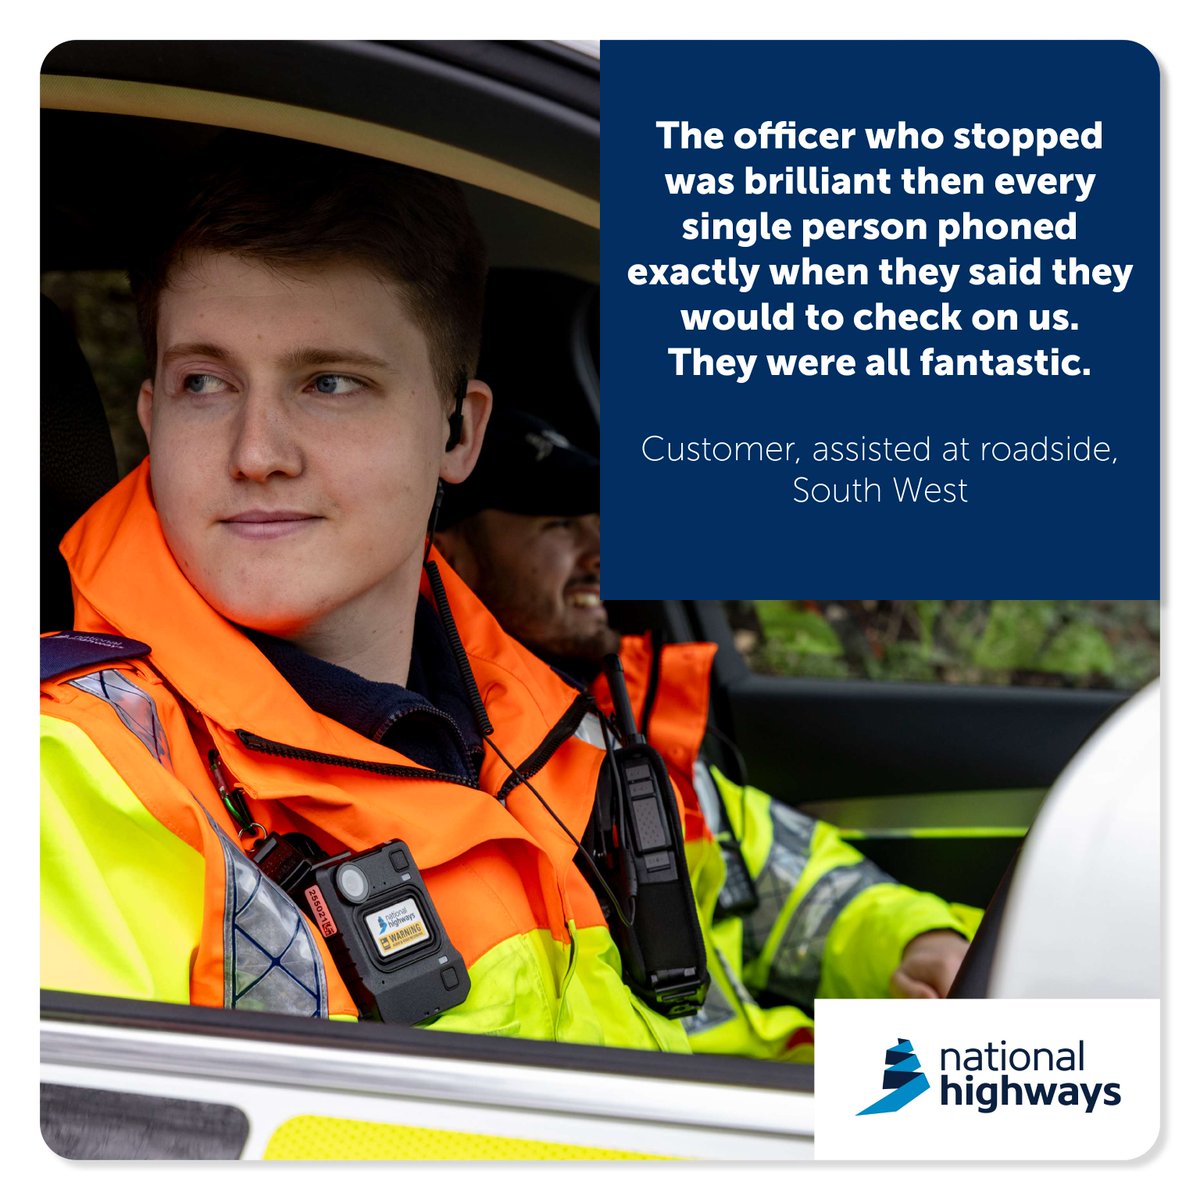 We're celebrating the twentieth anniversary of our traffic officers and operation centres! Here’s what our customers had to say about the help they received after contacting us for assistance. To find out more, visit: ▶️ nationalhighways.co.uk/about-us/our-f… #TO20